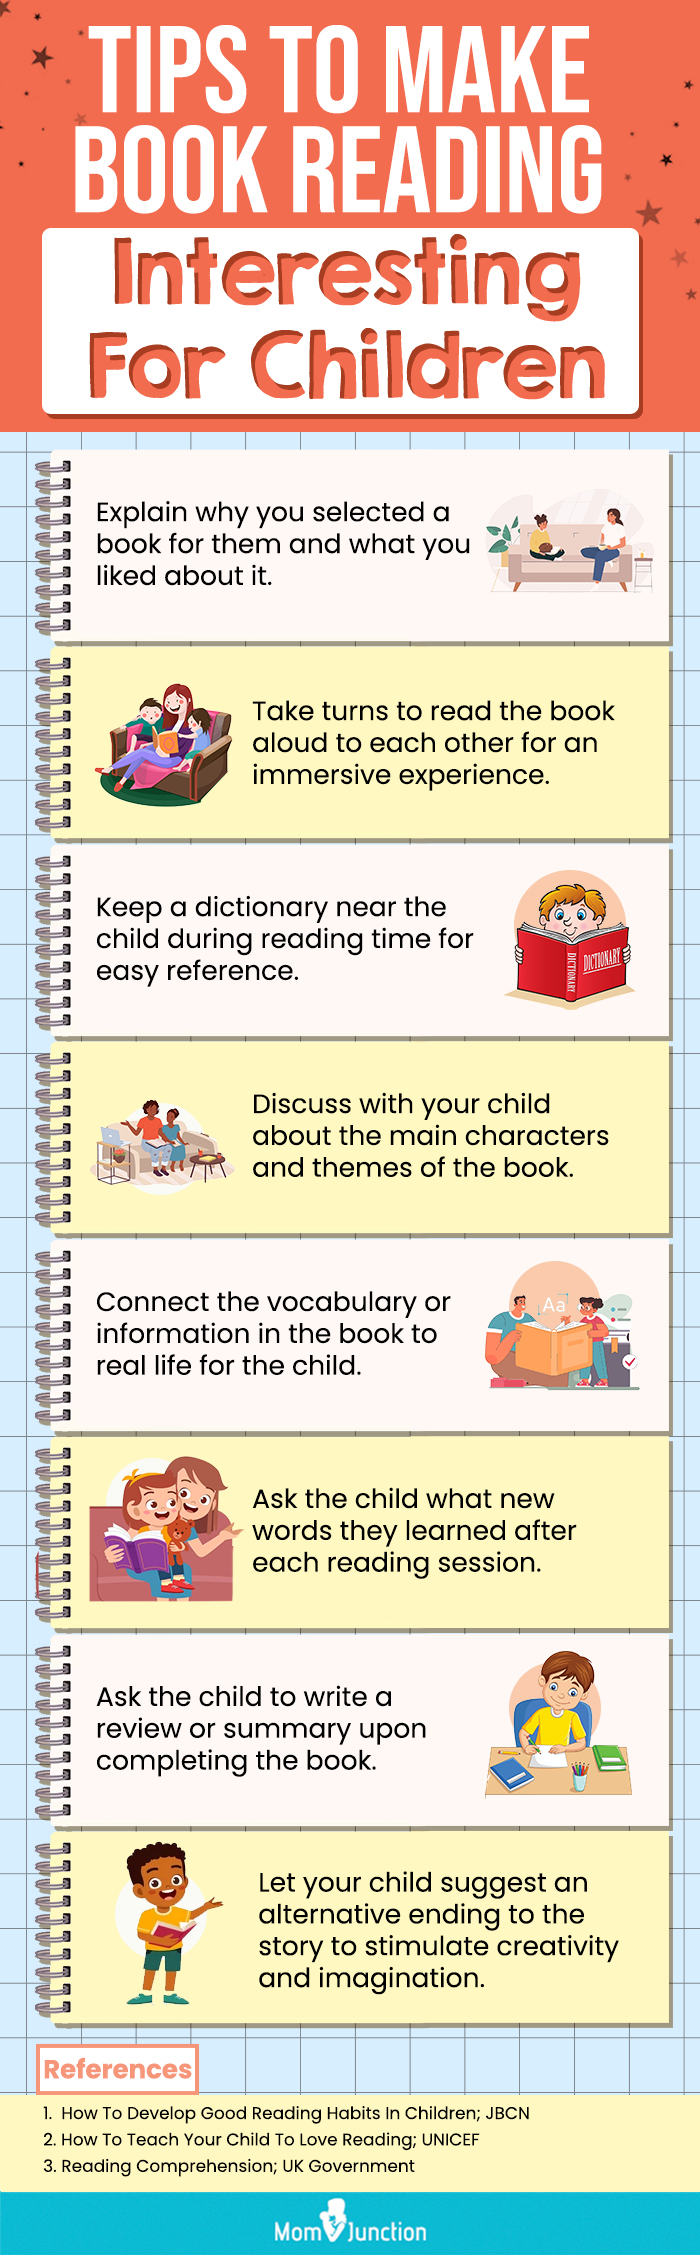 Tips To Make Book Reading Interesting For Children(infographic)